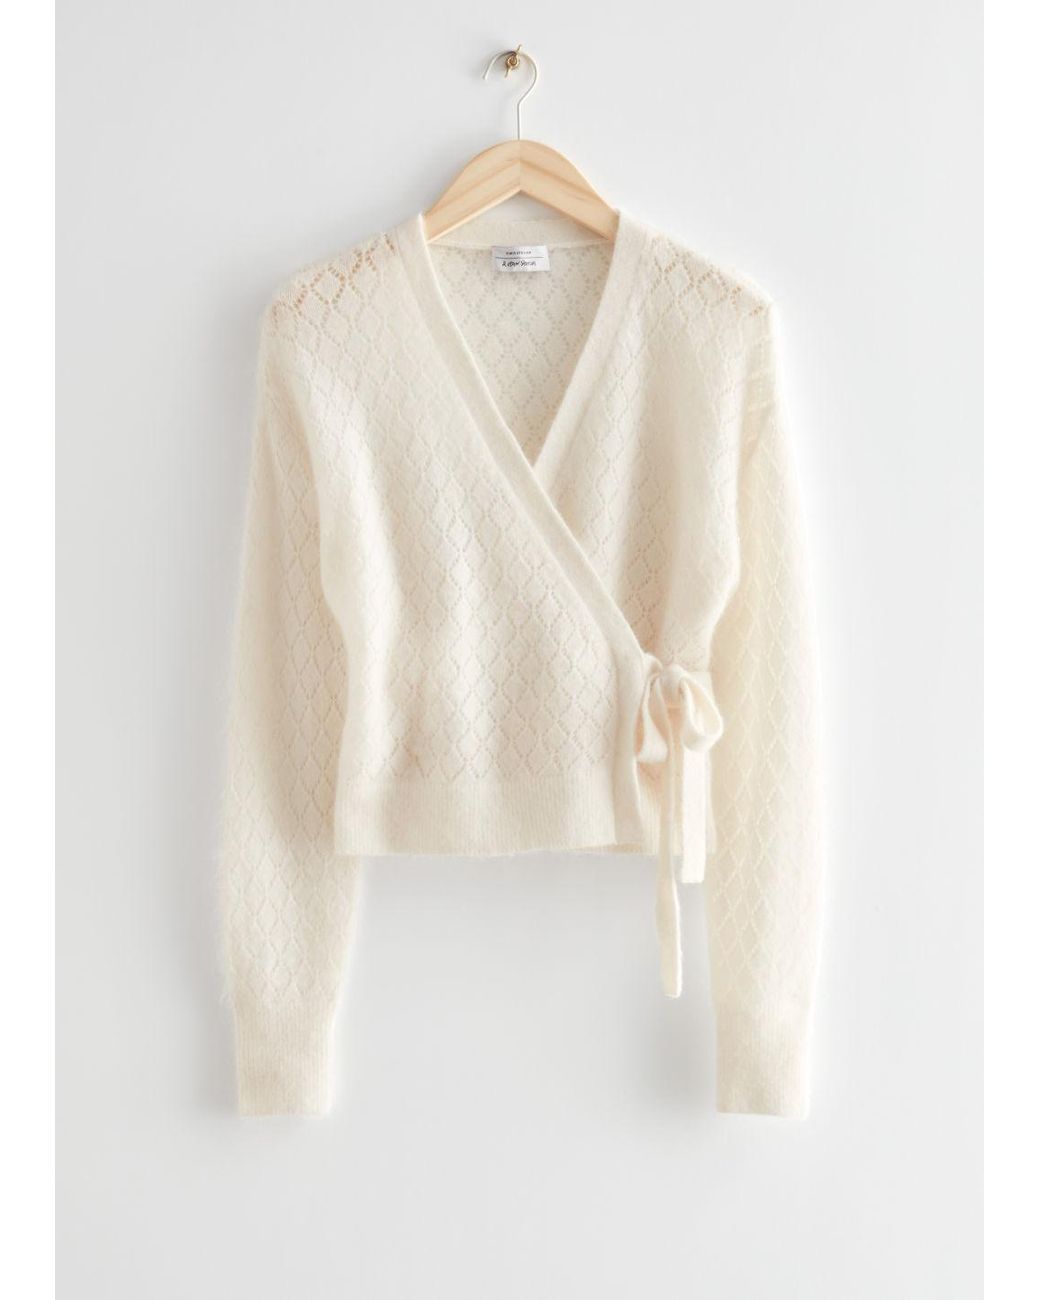 & Other Stories Pointelle Knit Wrap Cardigan in White | Lyst